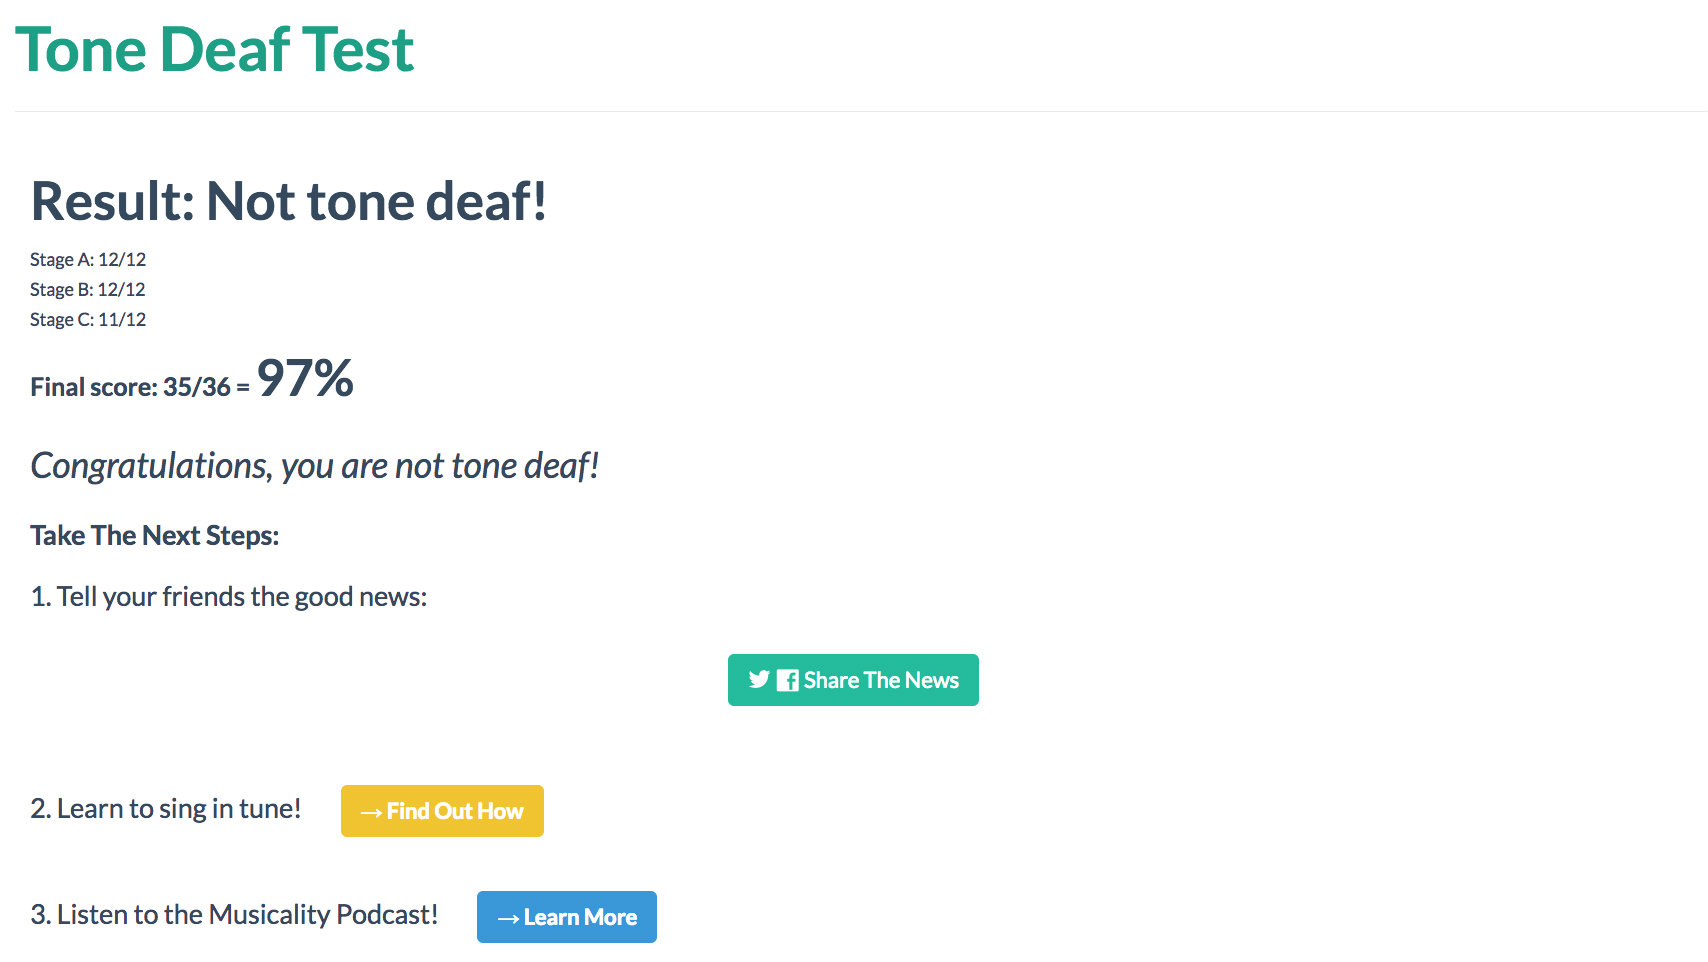 Are you tone deaf? Take this test find out once and for all